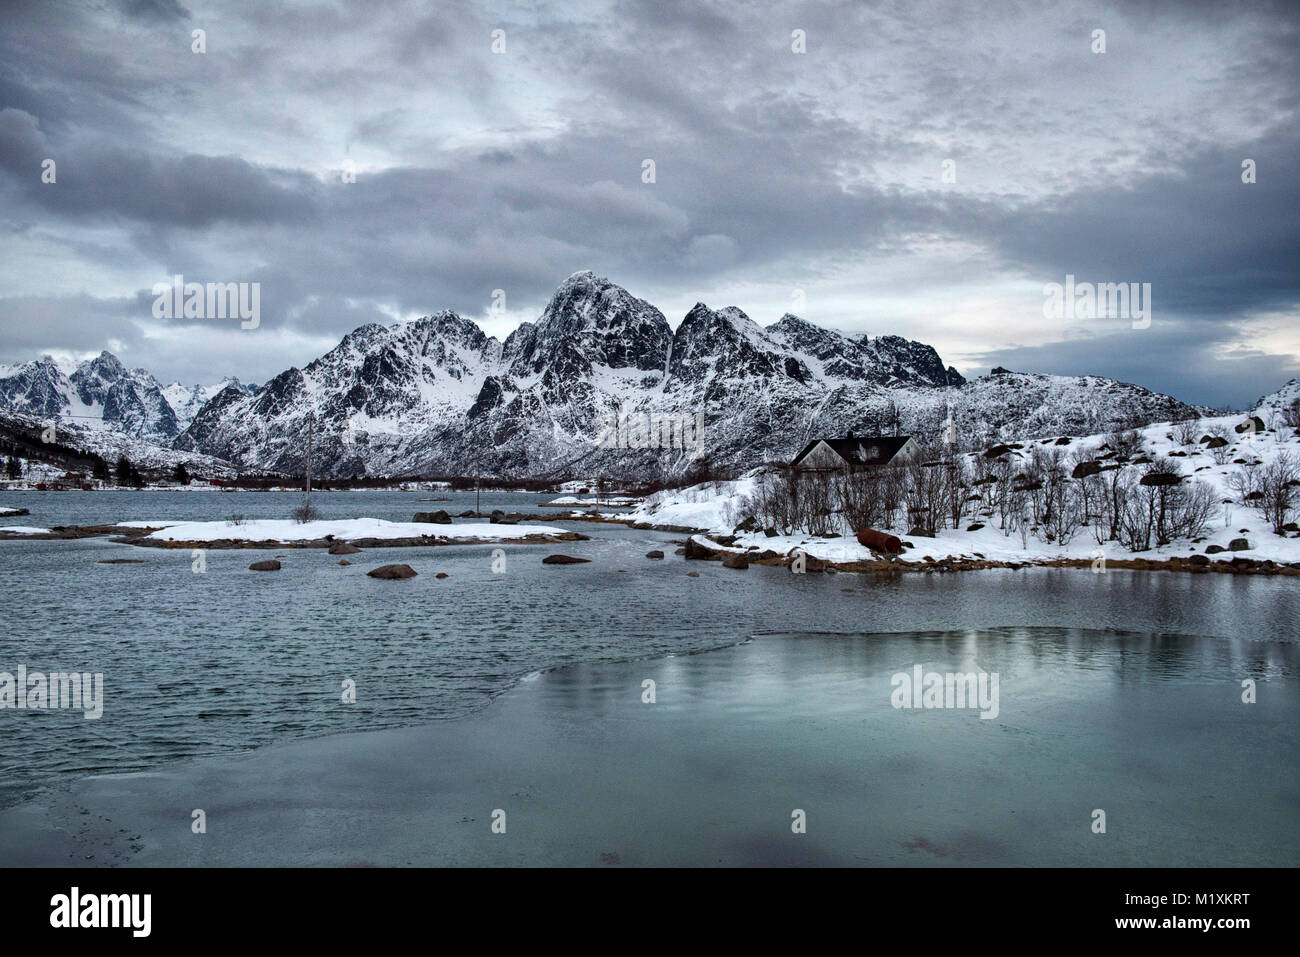 Snow covered landscape in the Lofoten Islands of Norway Stock Photo